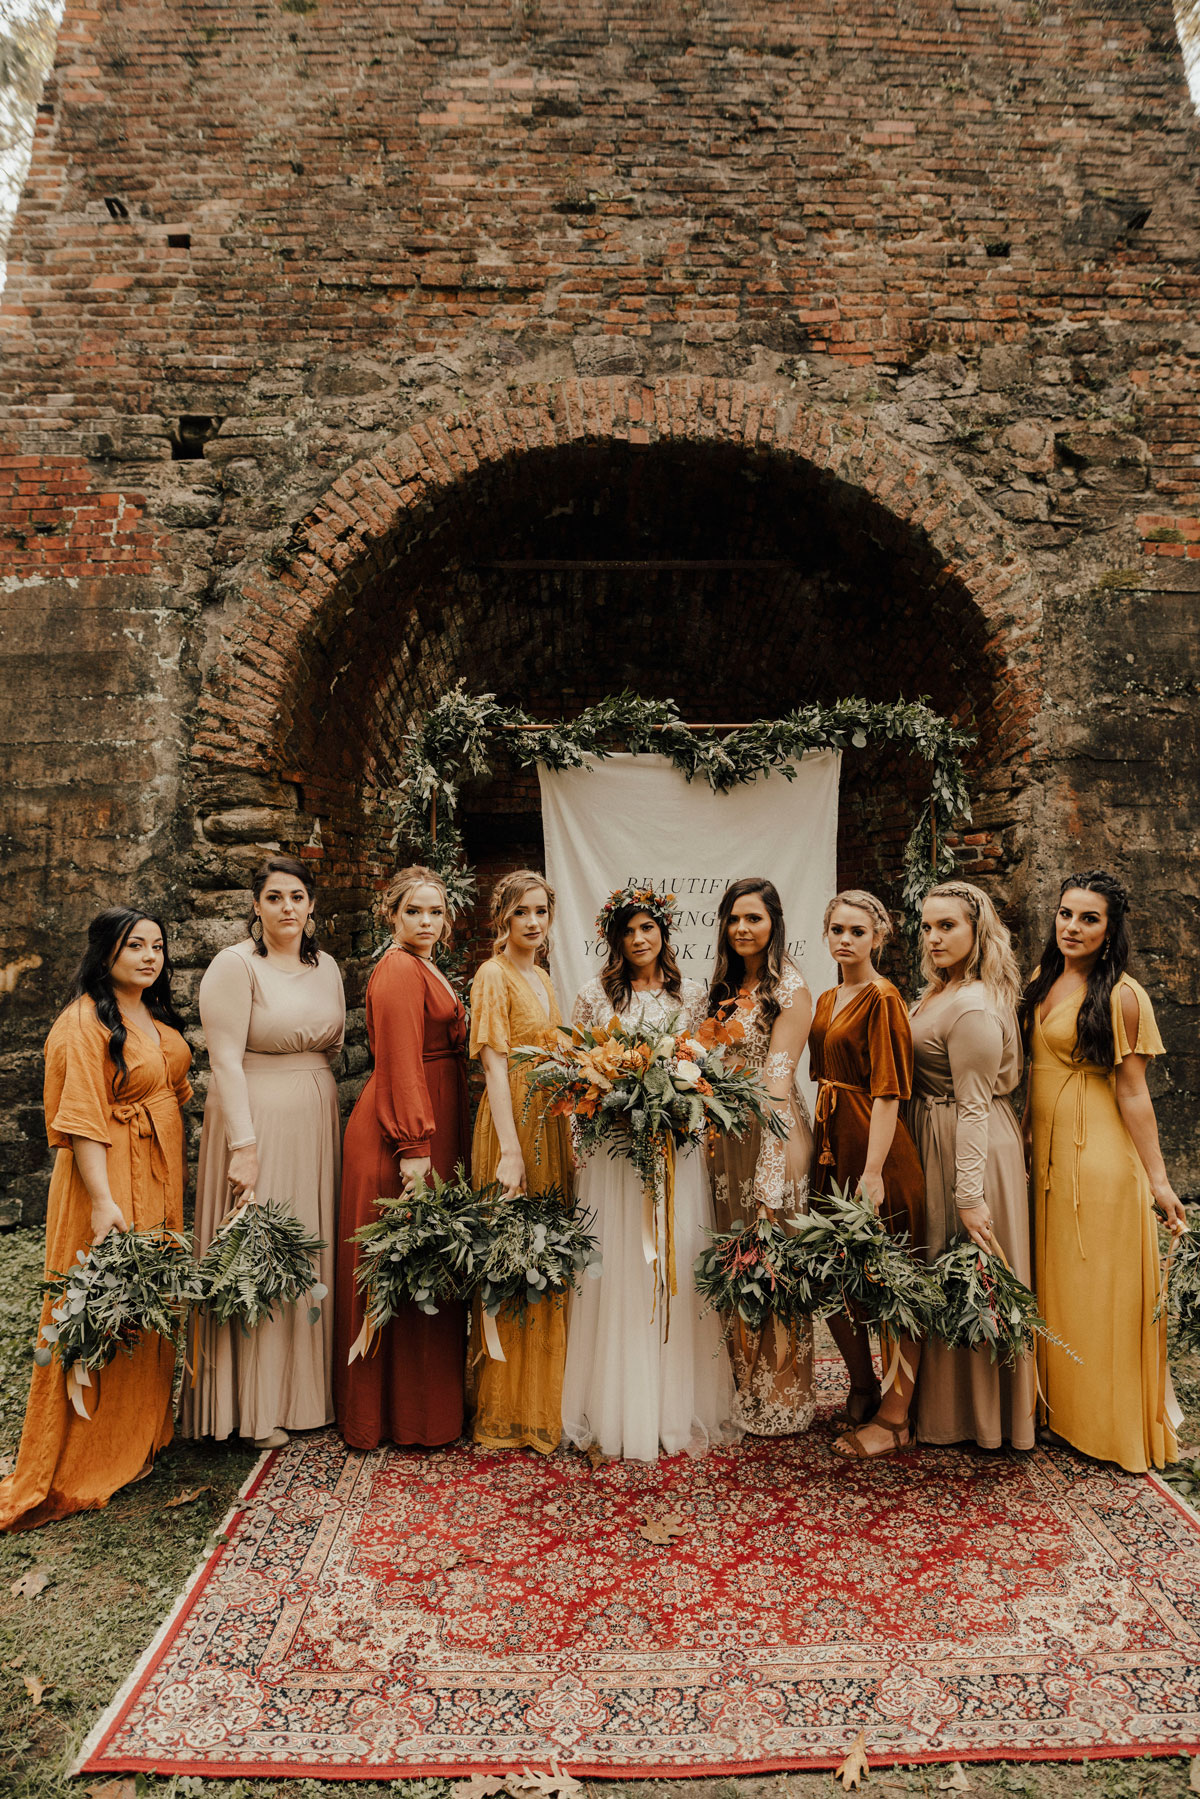 Get the look: yellow bridesmaid dresses